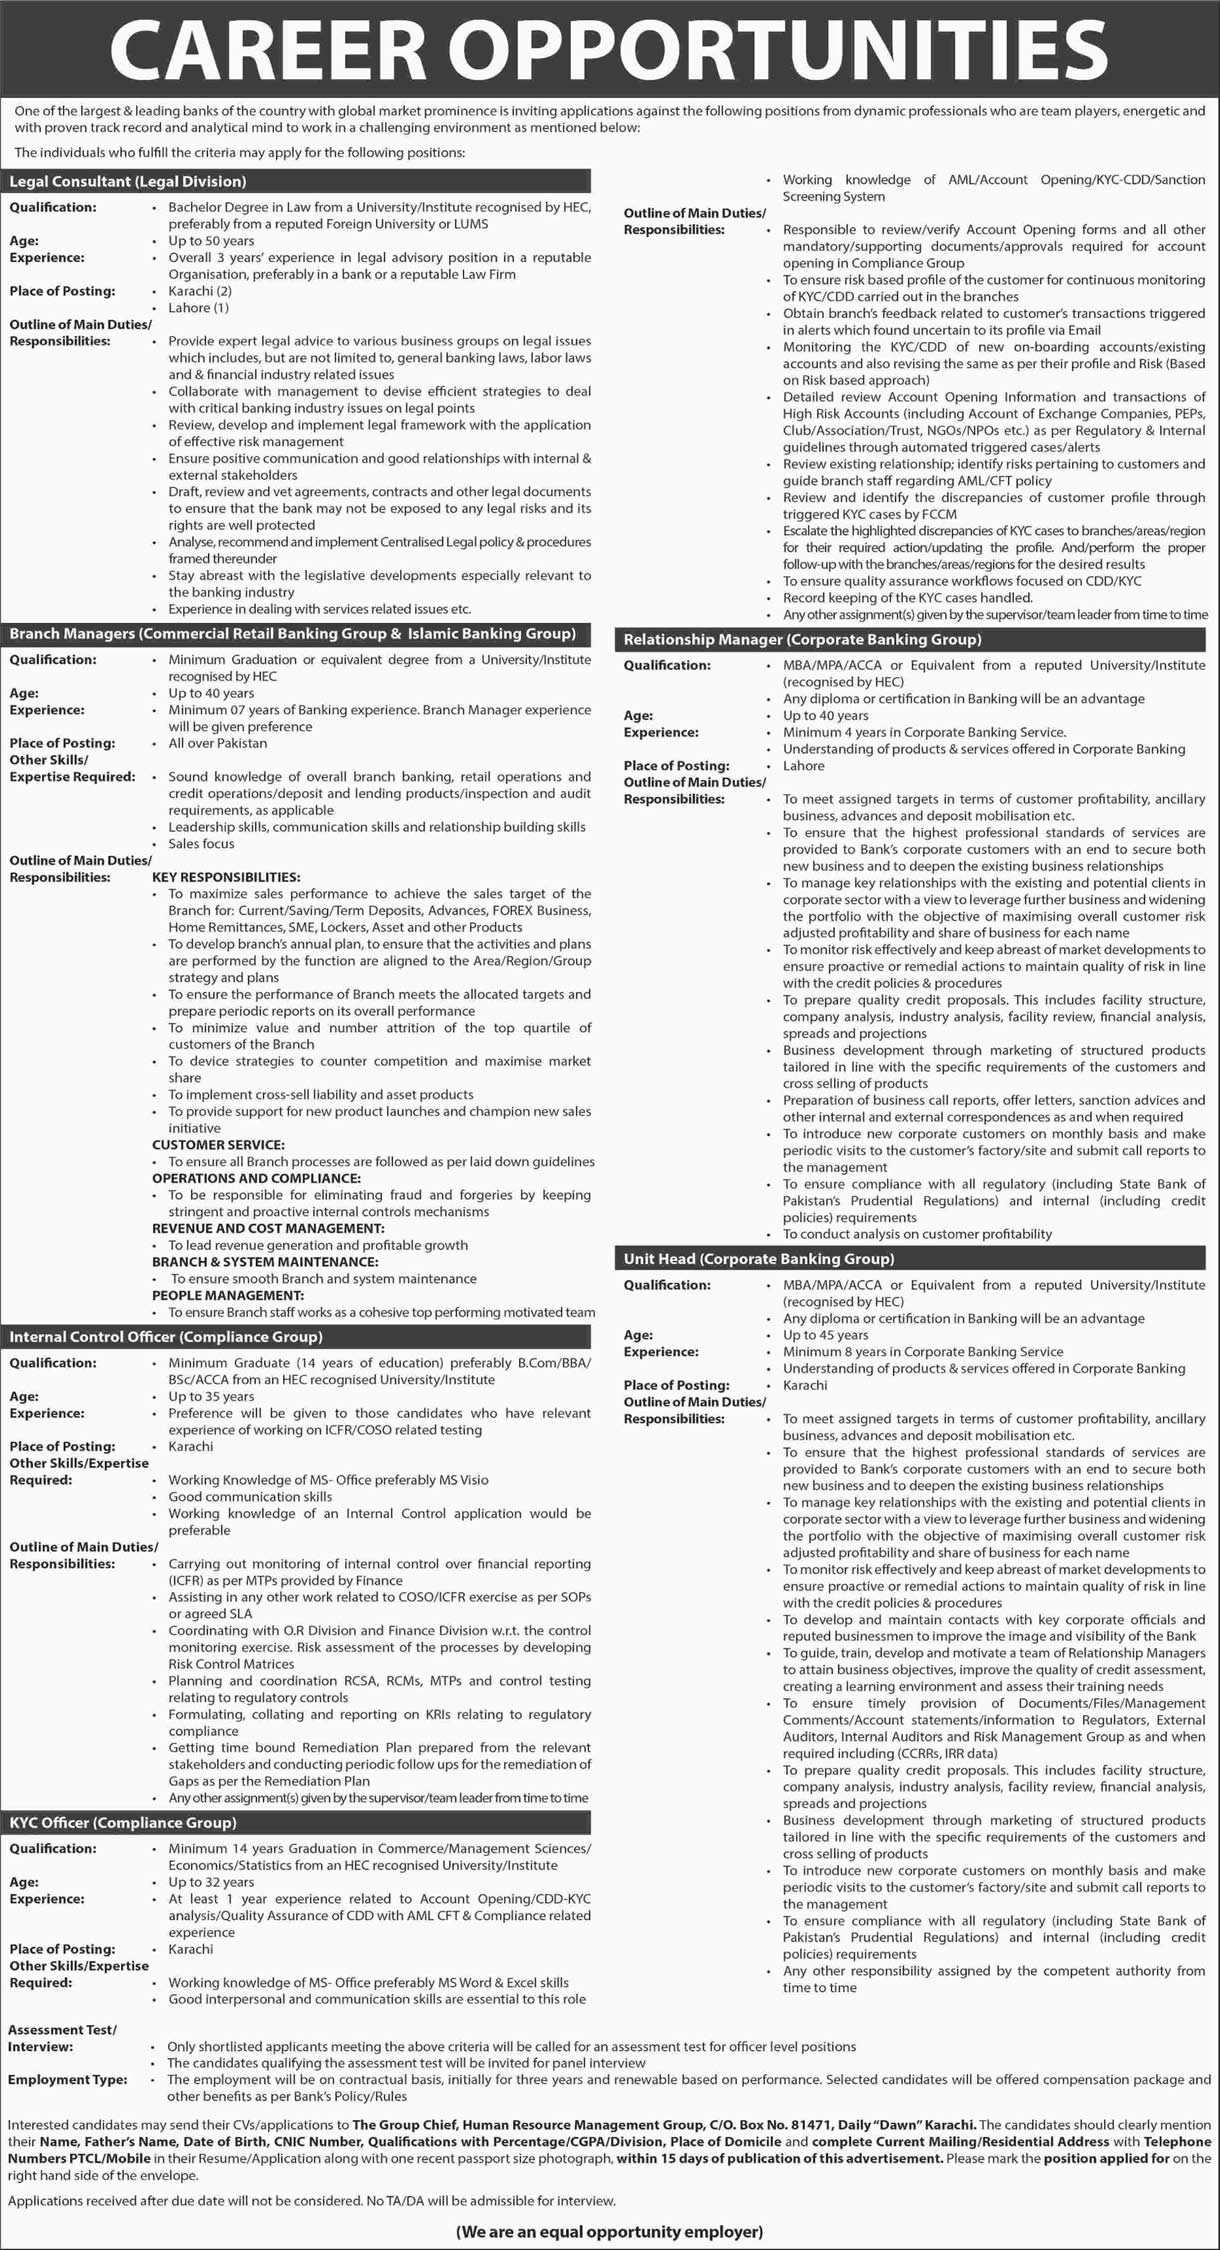 Banking Jobs in Pakistan October 2017 November Branch / Relationship Managers & Others Latest